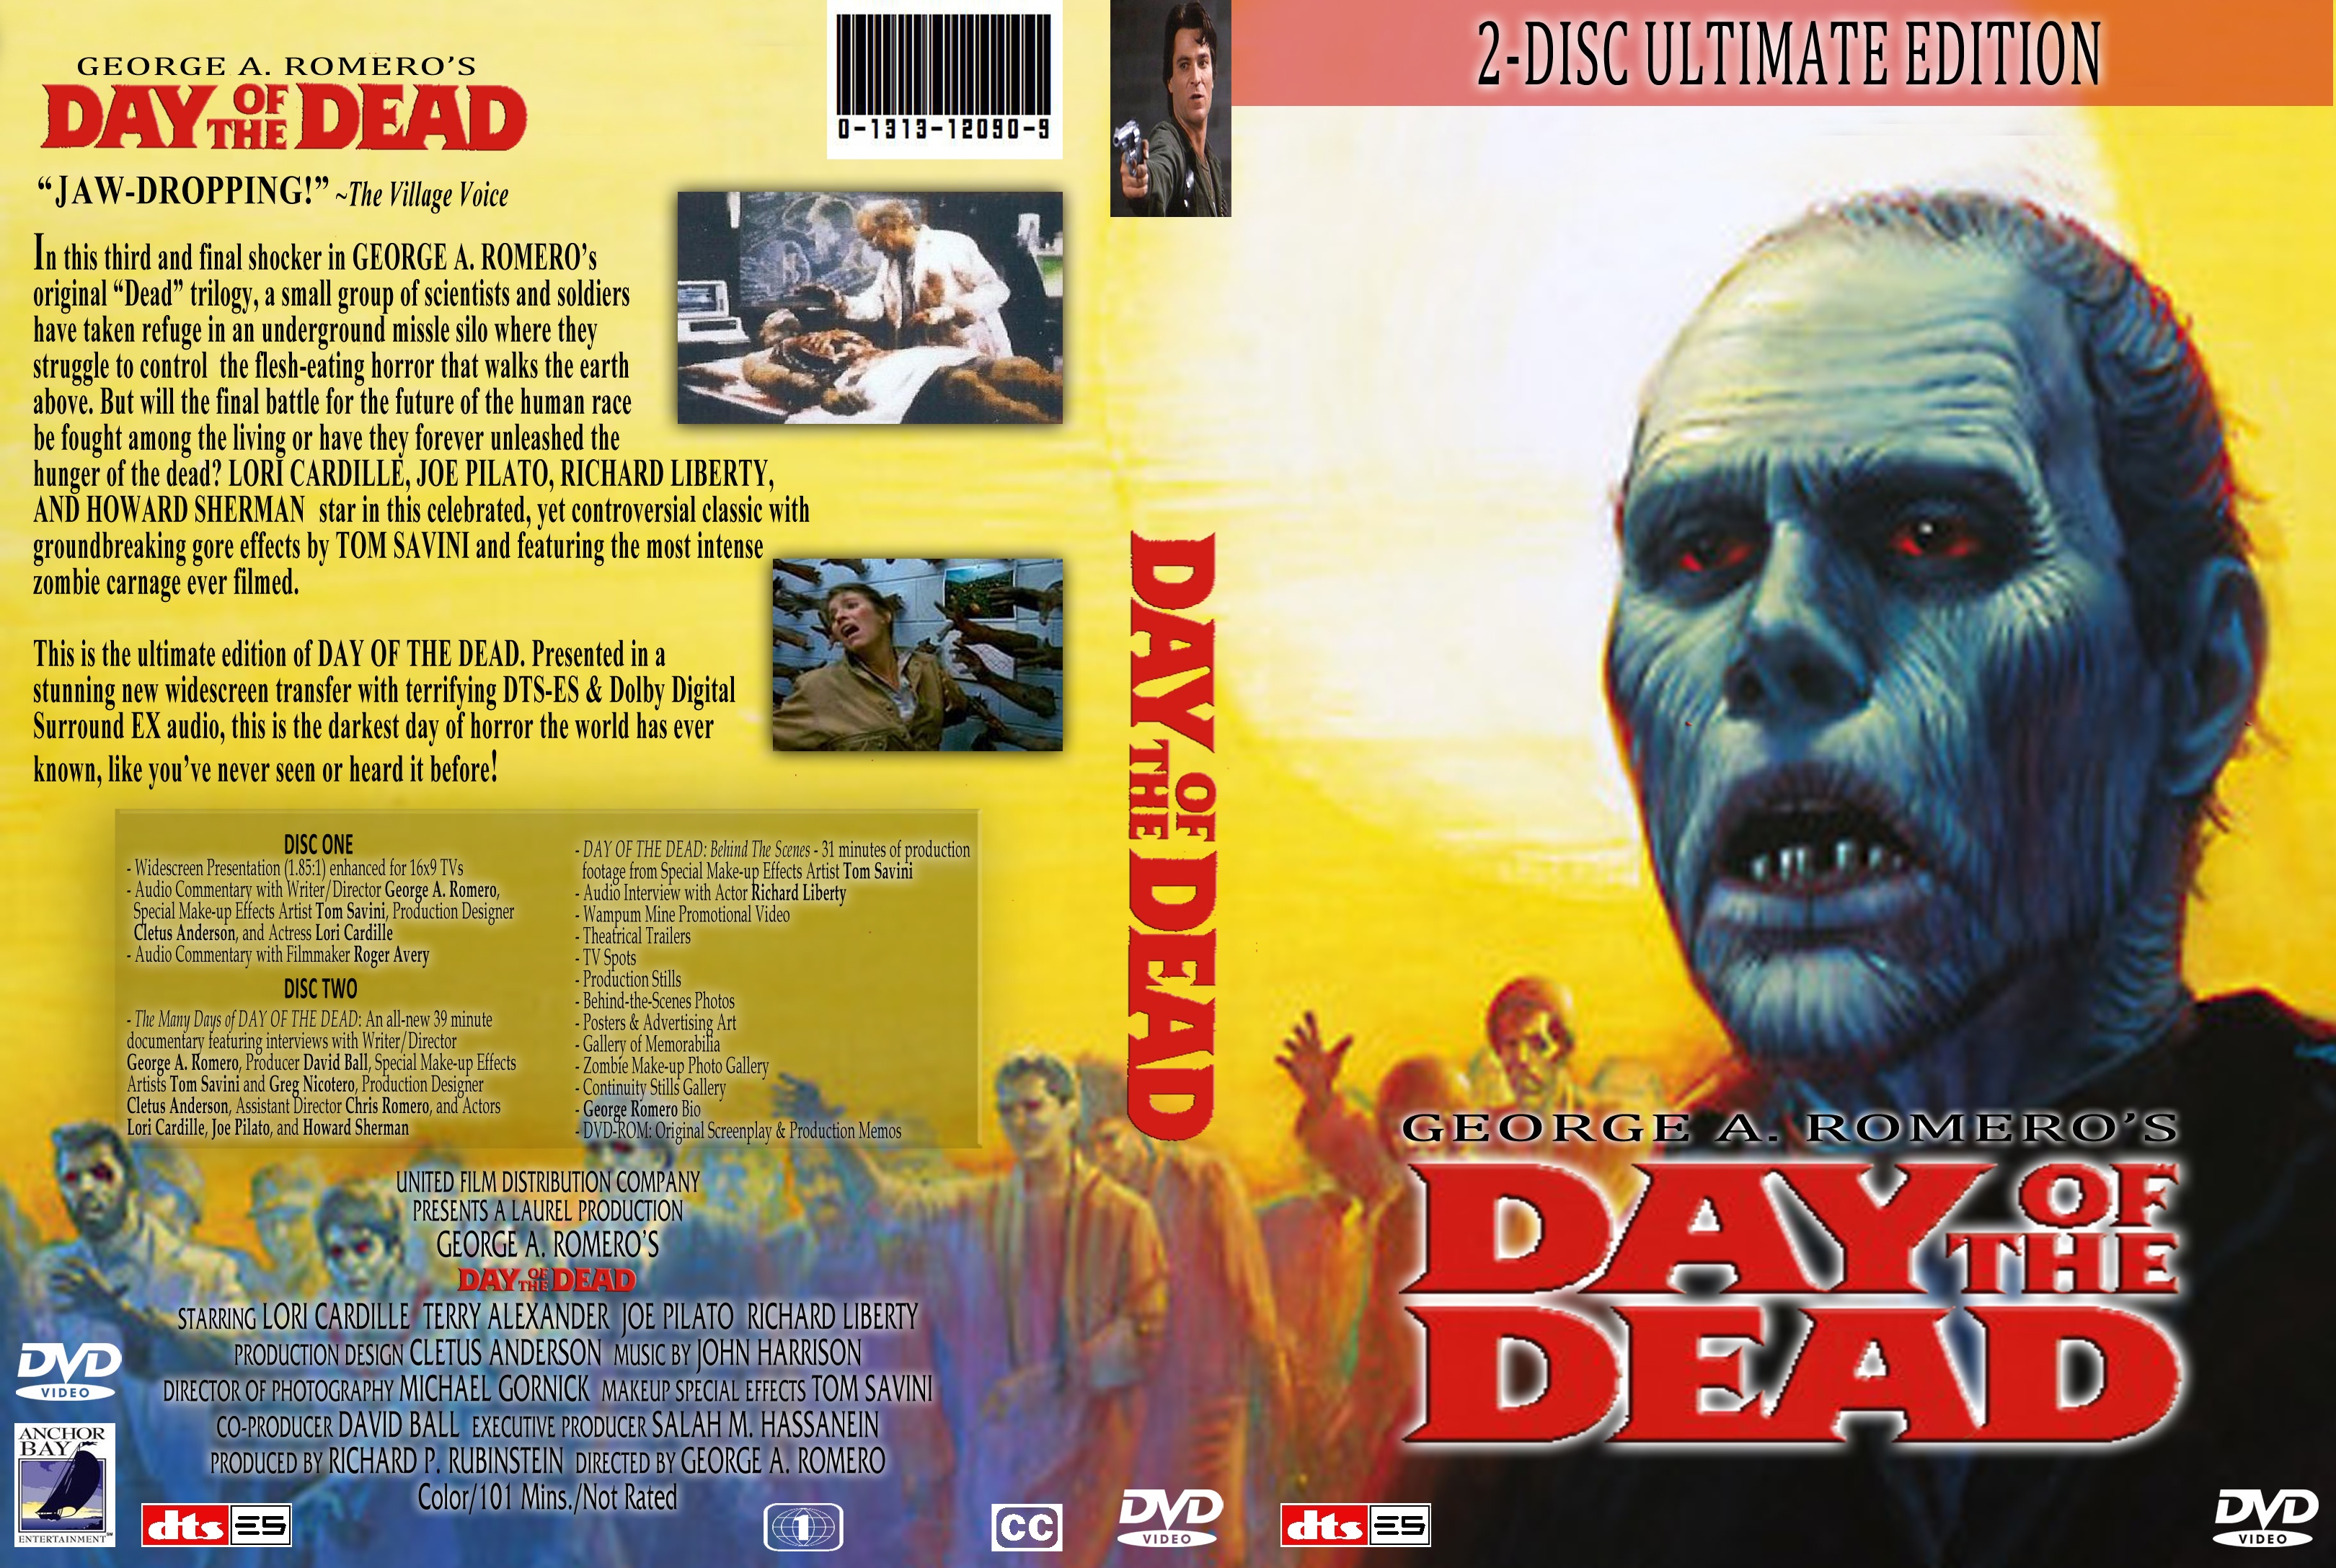 Day Of The Dead box cover